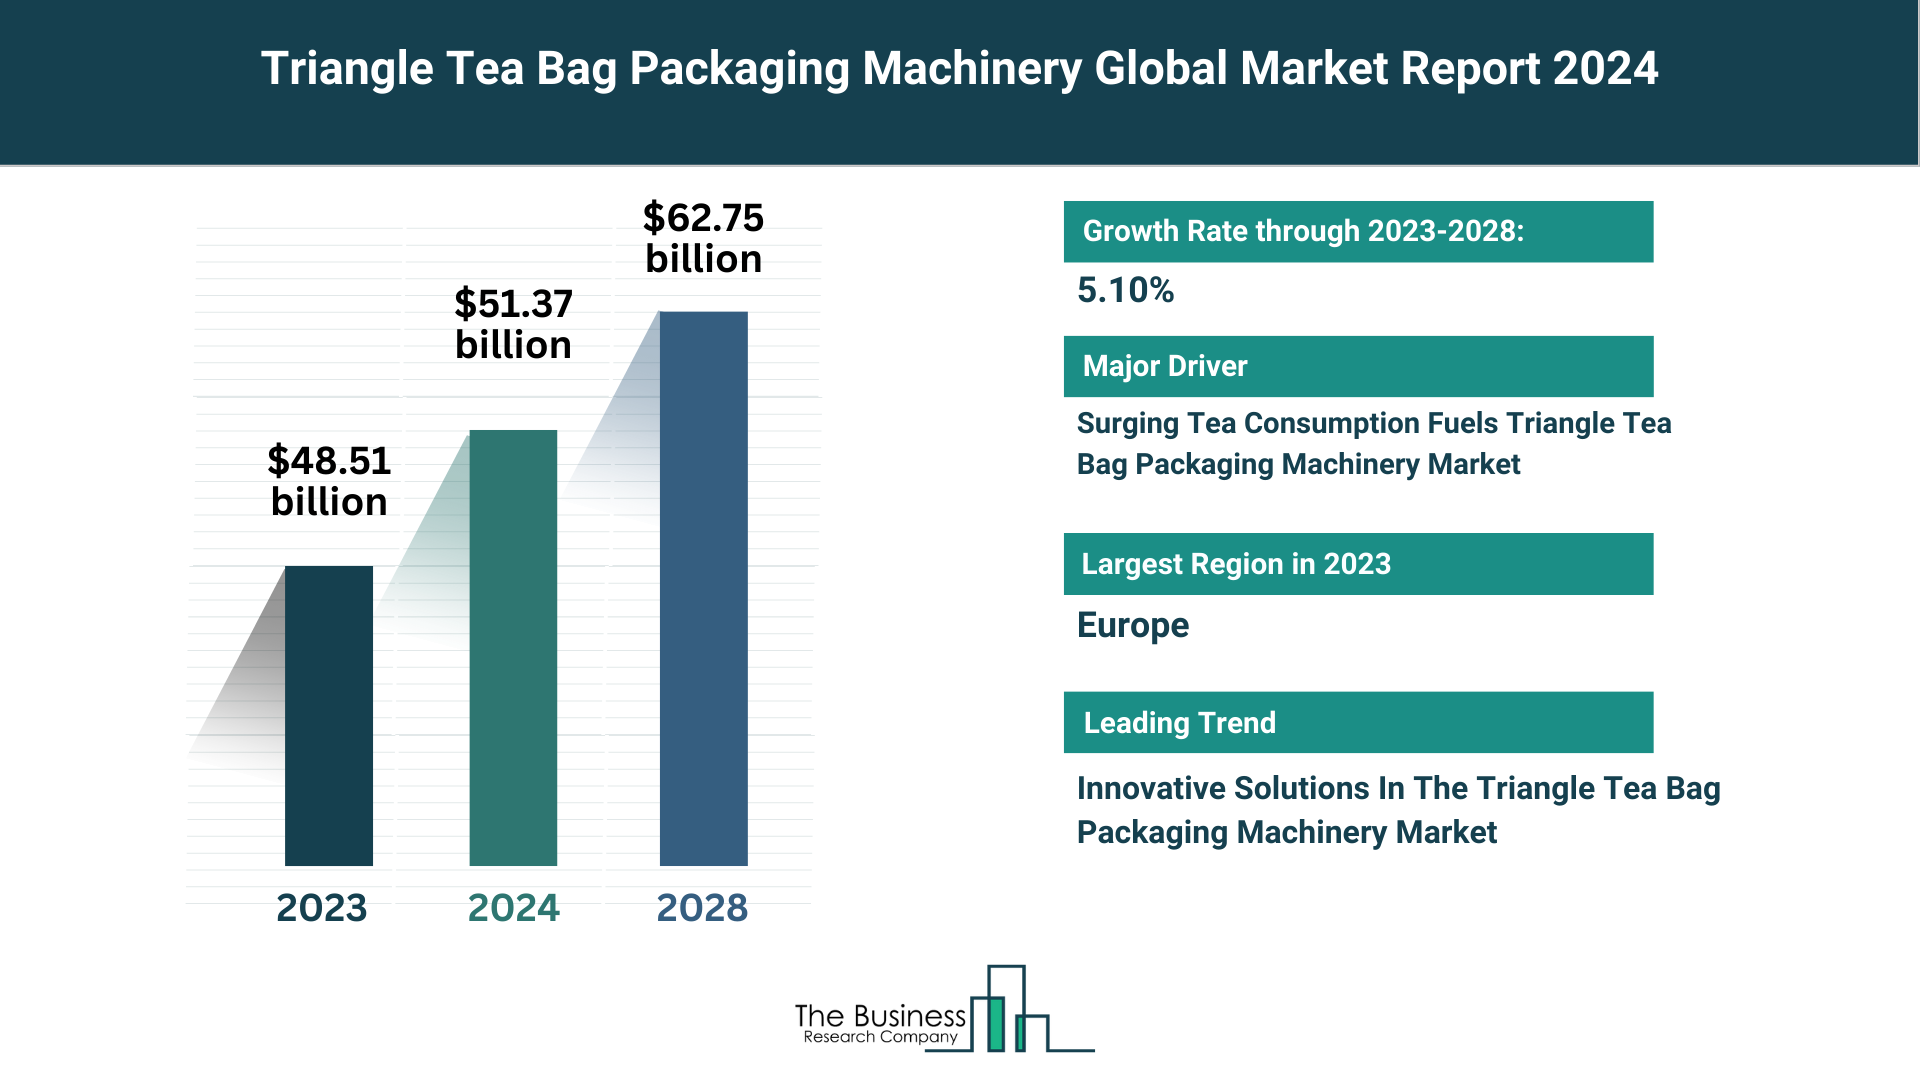 What Are The 5 Top Insights From The Triangle Tea Bag Packaging Machinery Market Forecast 2024